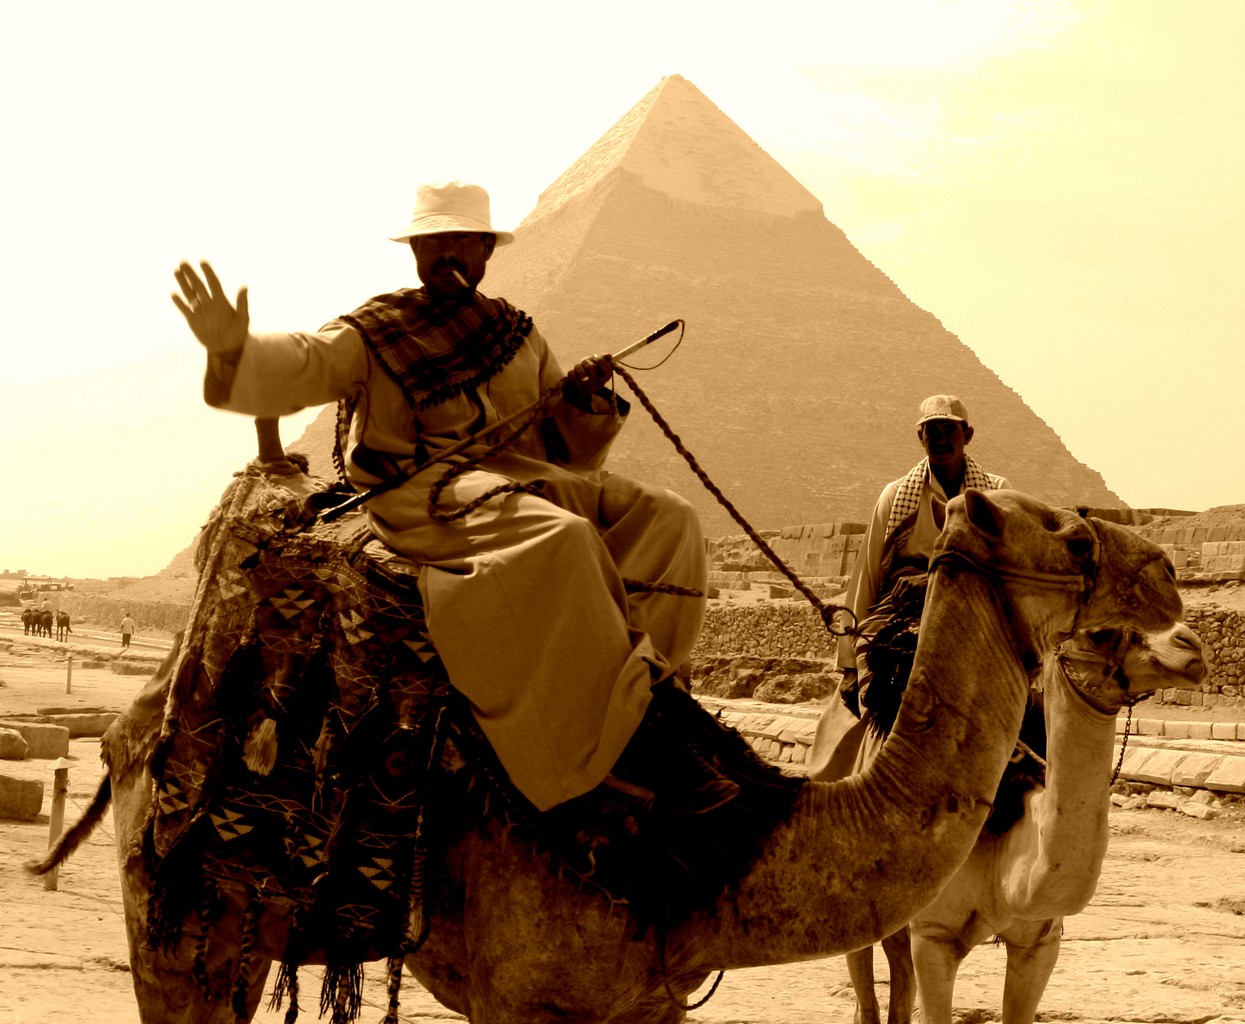 Tour guides on camels in front of Giza pyramids